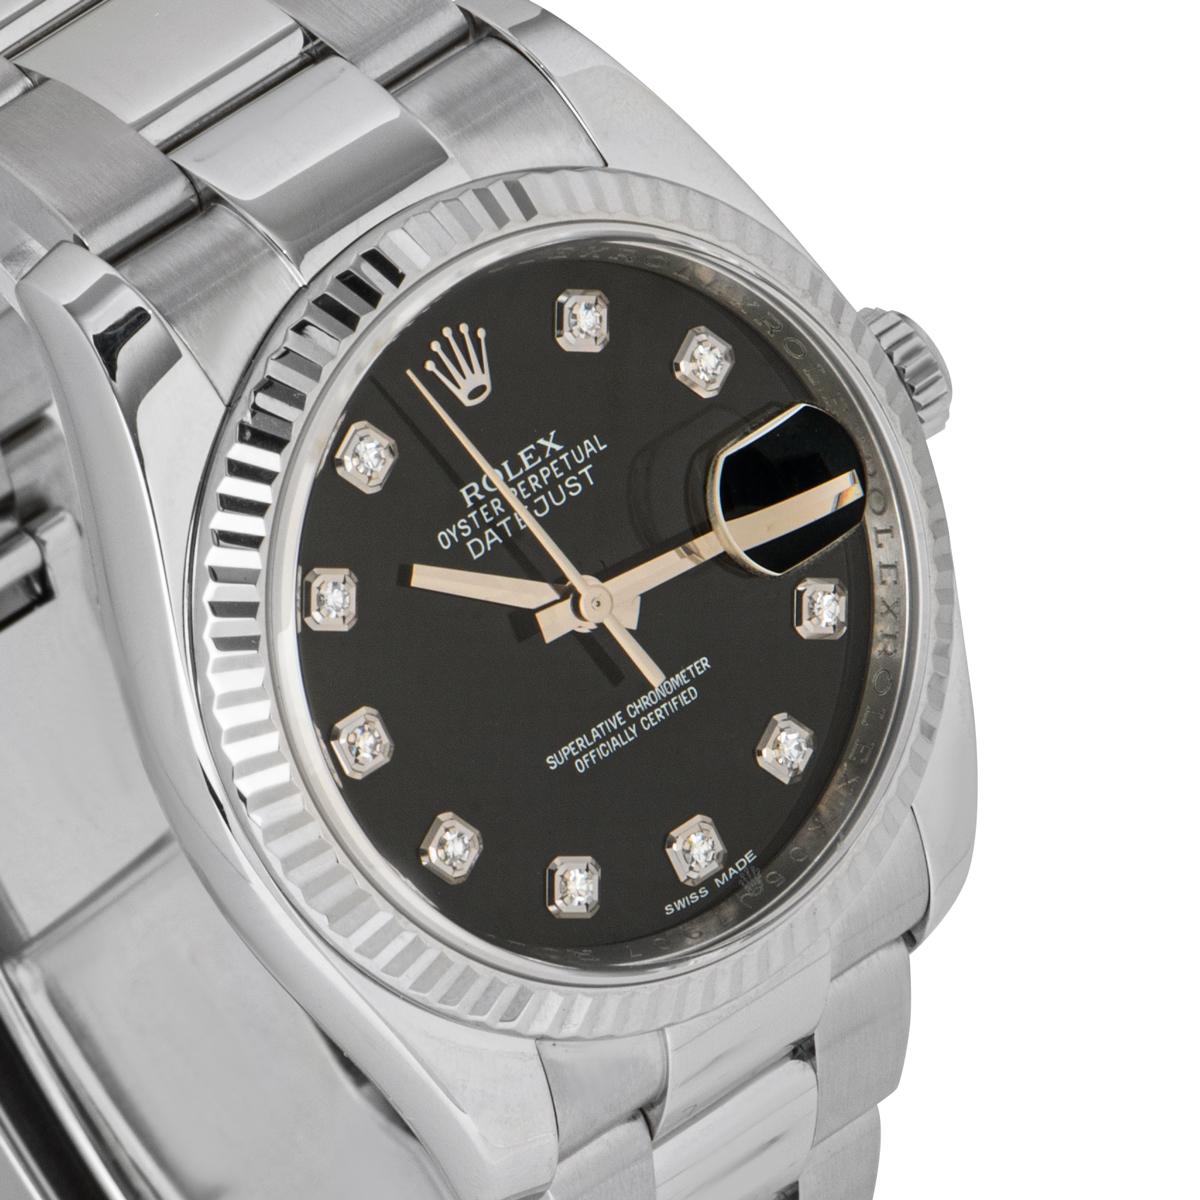 Rolex Datejust Diamond Dial 116234 In Excellent Condition For Sale In London, GB